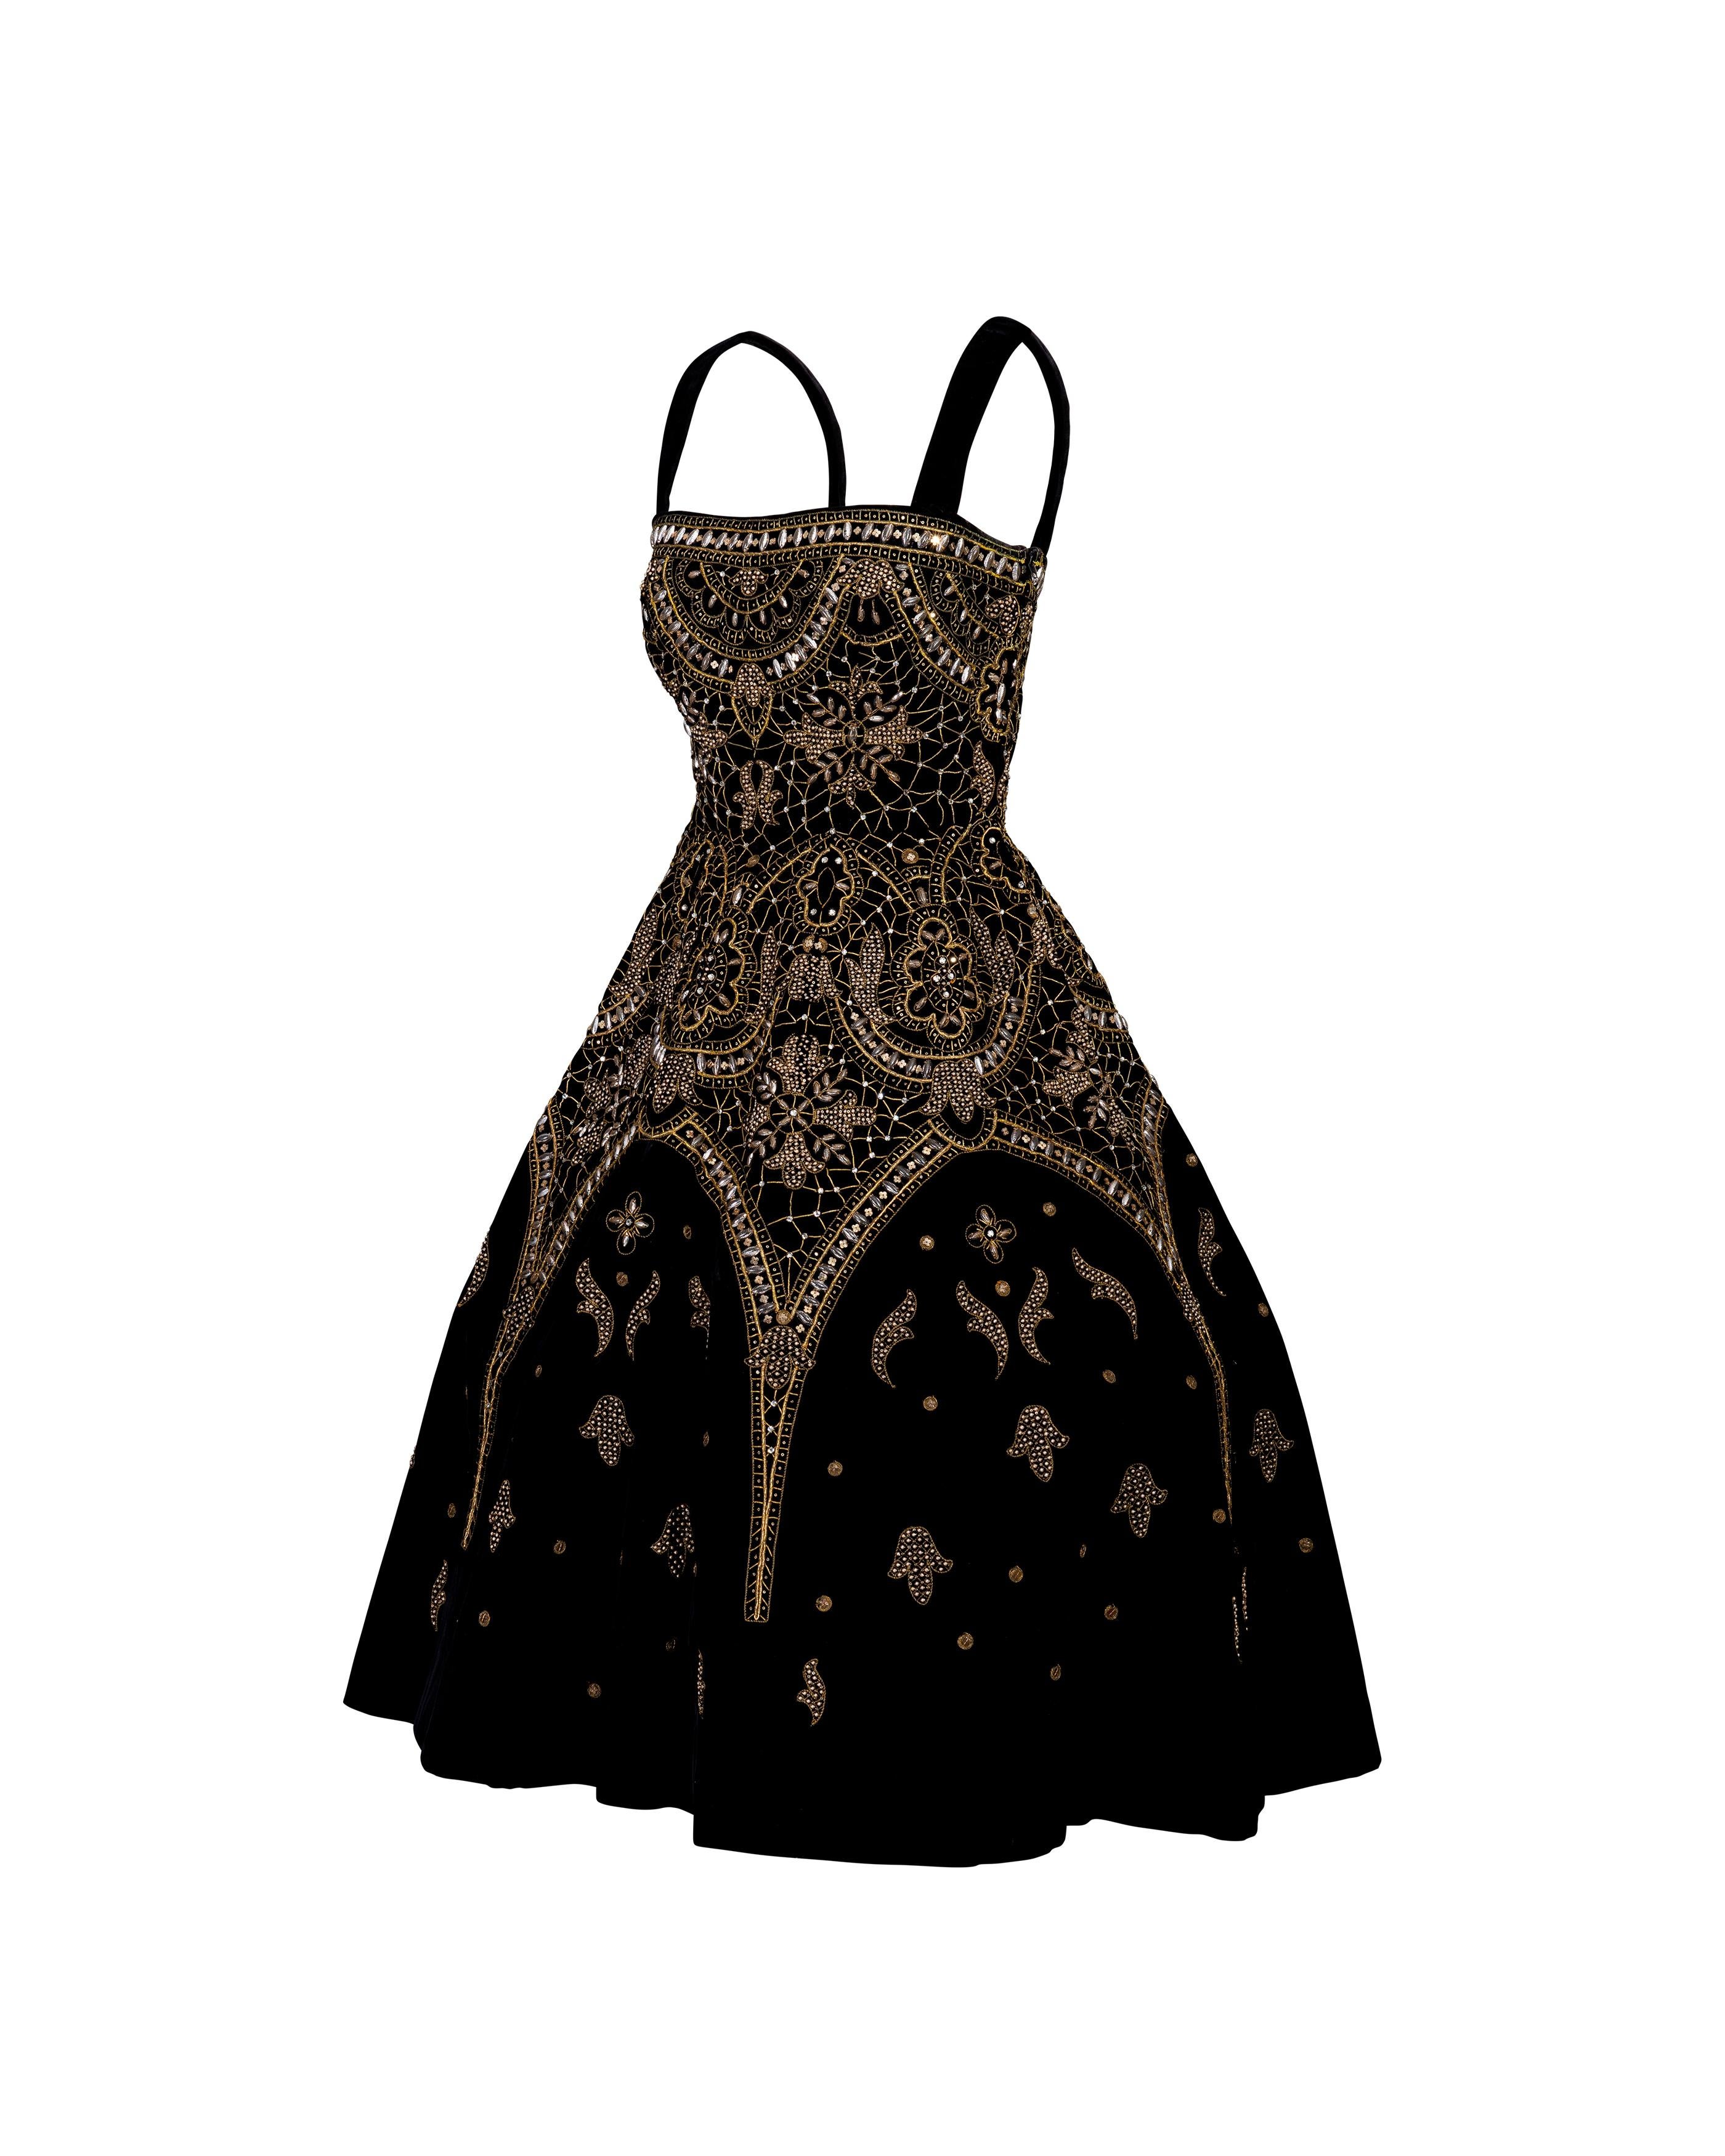 A/W 1956 Jeanne Lanvin Haute Couture Black and Gold Embroidered Velvet Dress In Good Condition For Sale In North Hollywood, CA